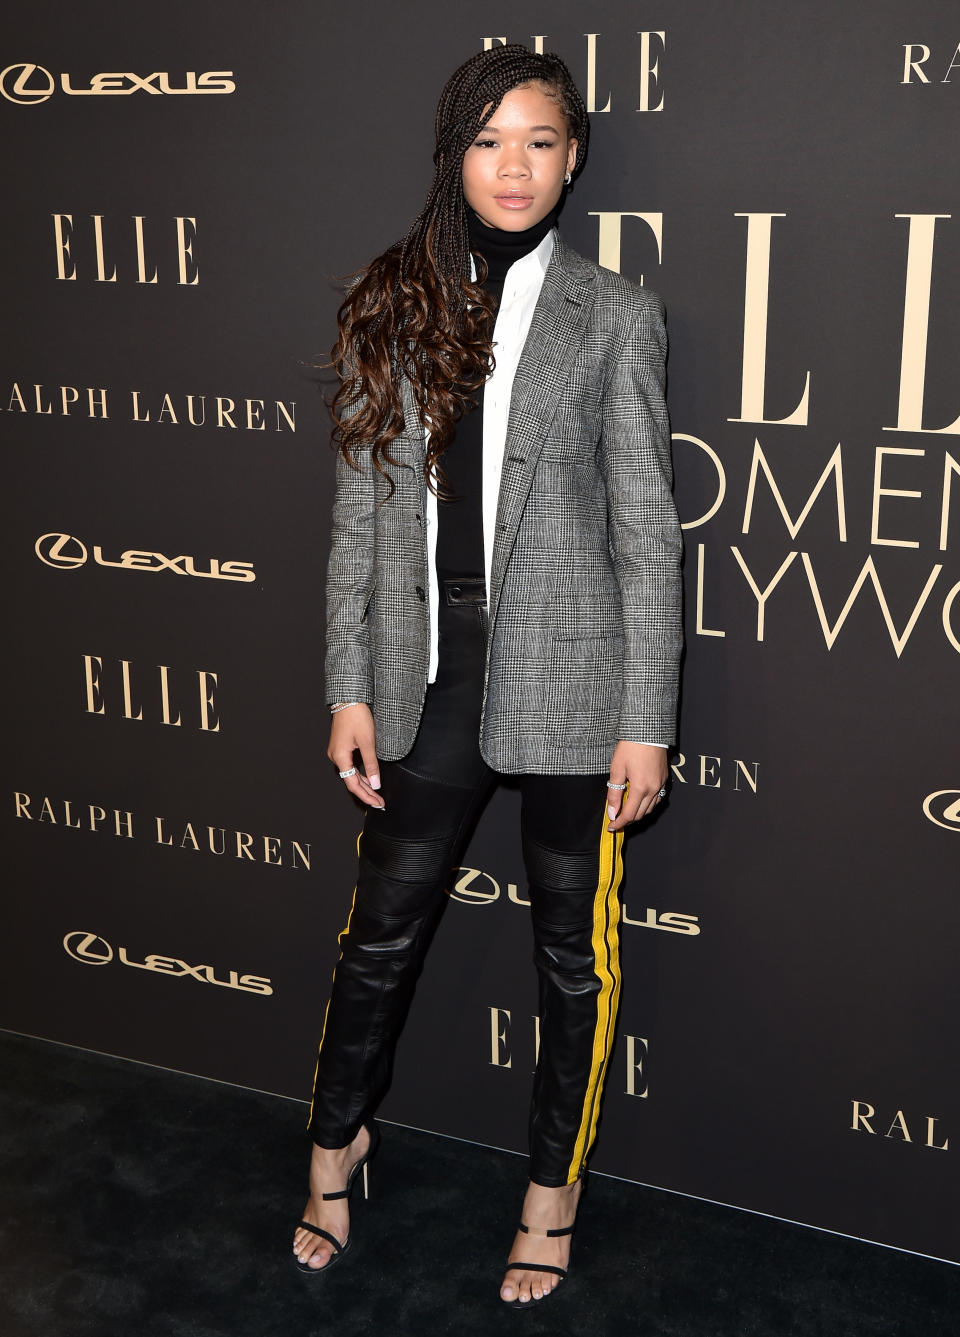 BEVERLY HILLS, CALIFORNIA - OCTOBER 14: Storm Reid attends the 2019 ELLE Women In Hollywood at the Beverly Wilshire Four Seasons Hotel on October 14, 2019 in Beverly Hills, California. (Photo by Axelle/Bauer-Griffin/FilmMagic)